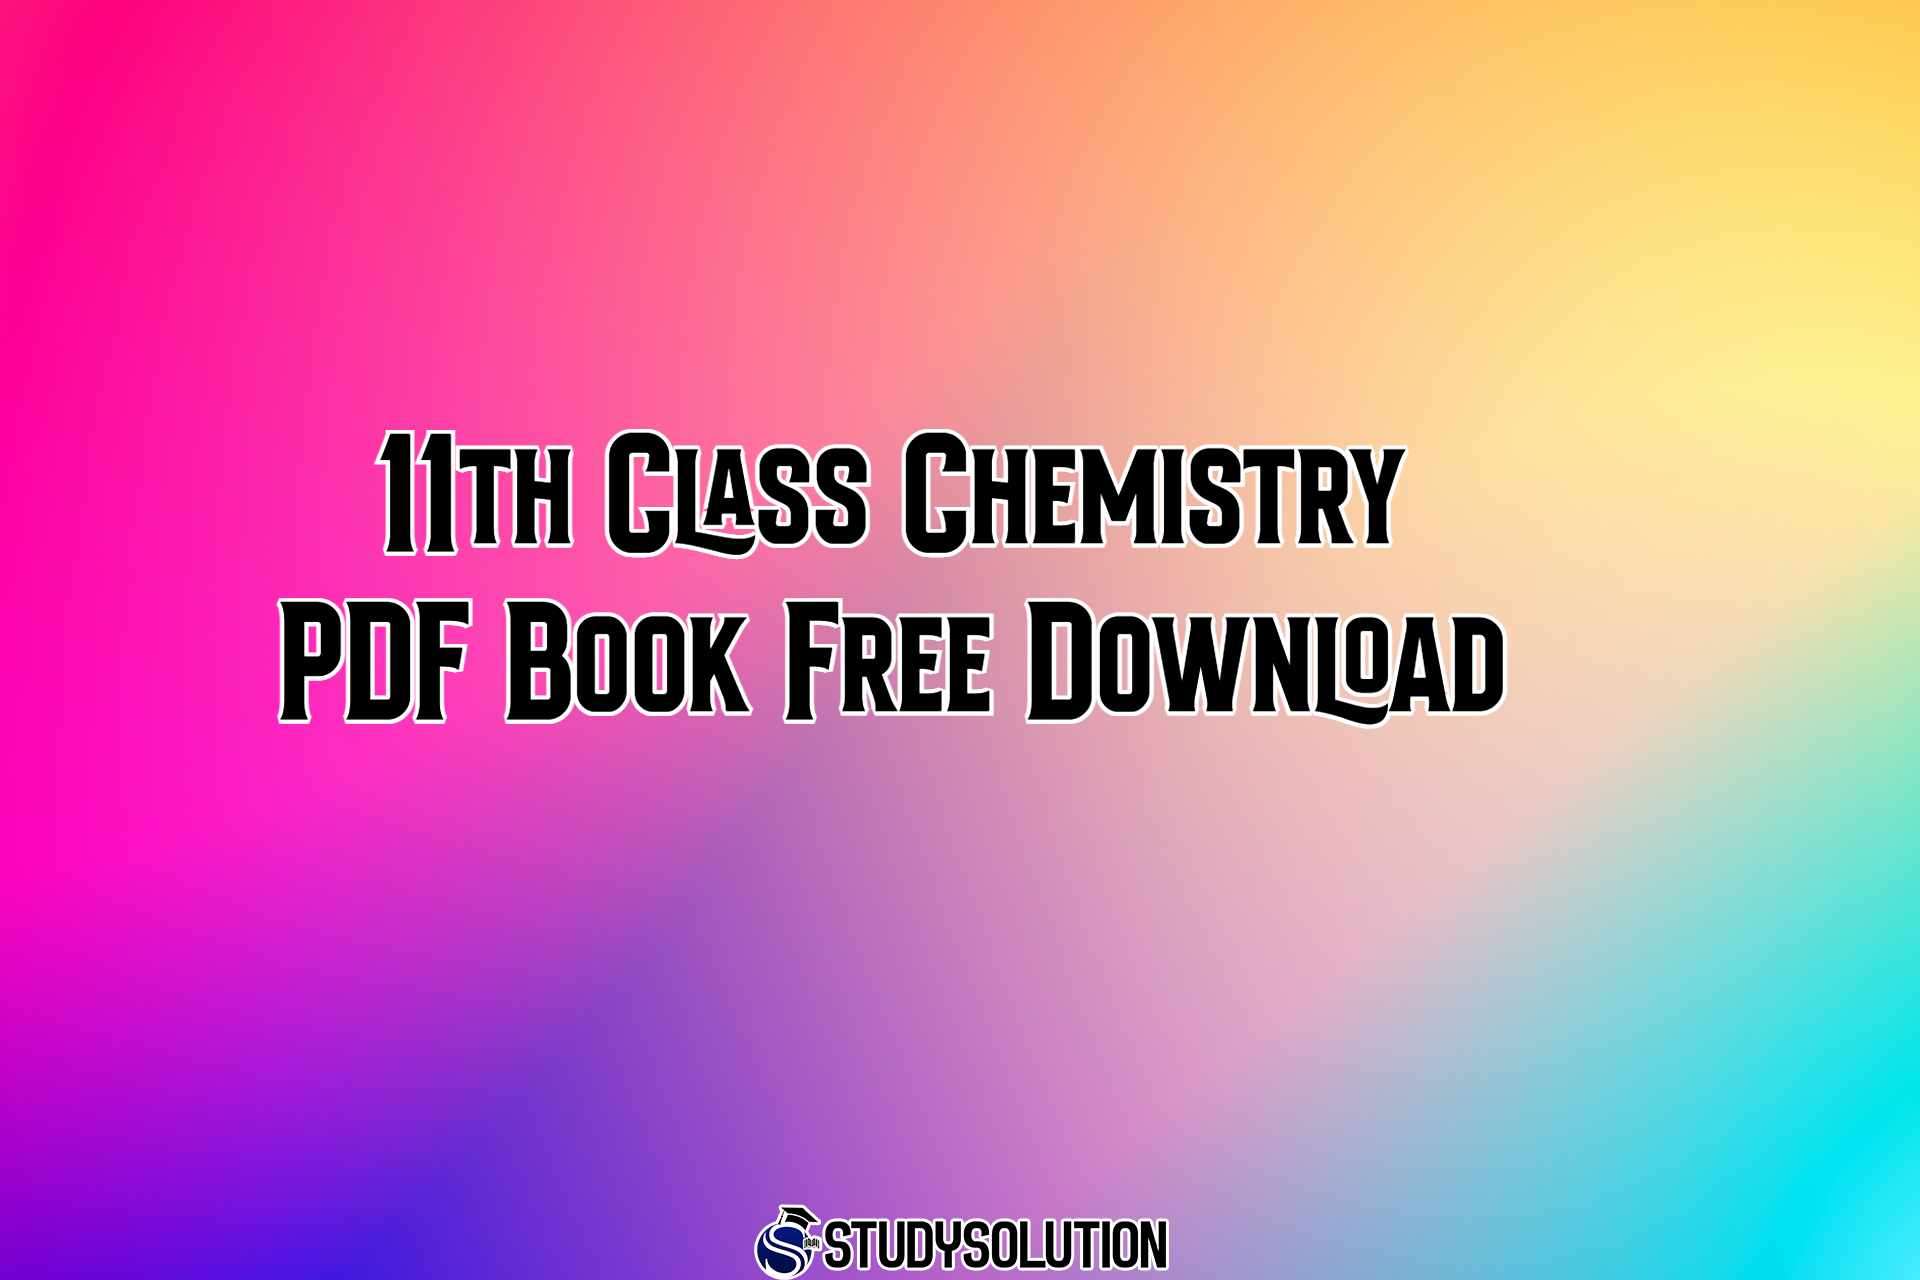 11th Class Chemistry PDF Book Free Download